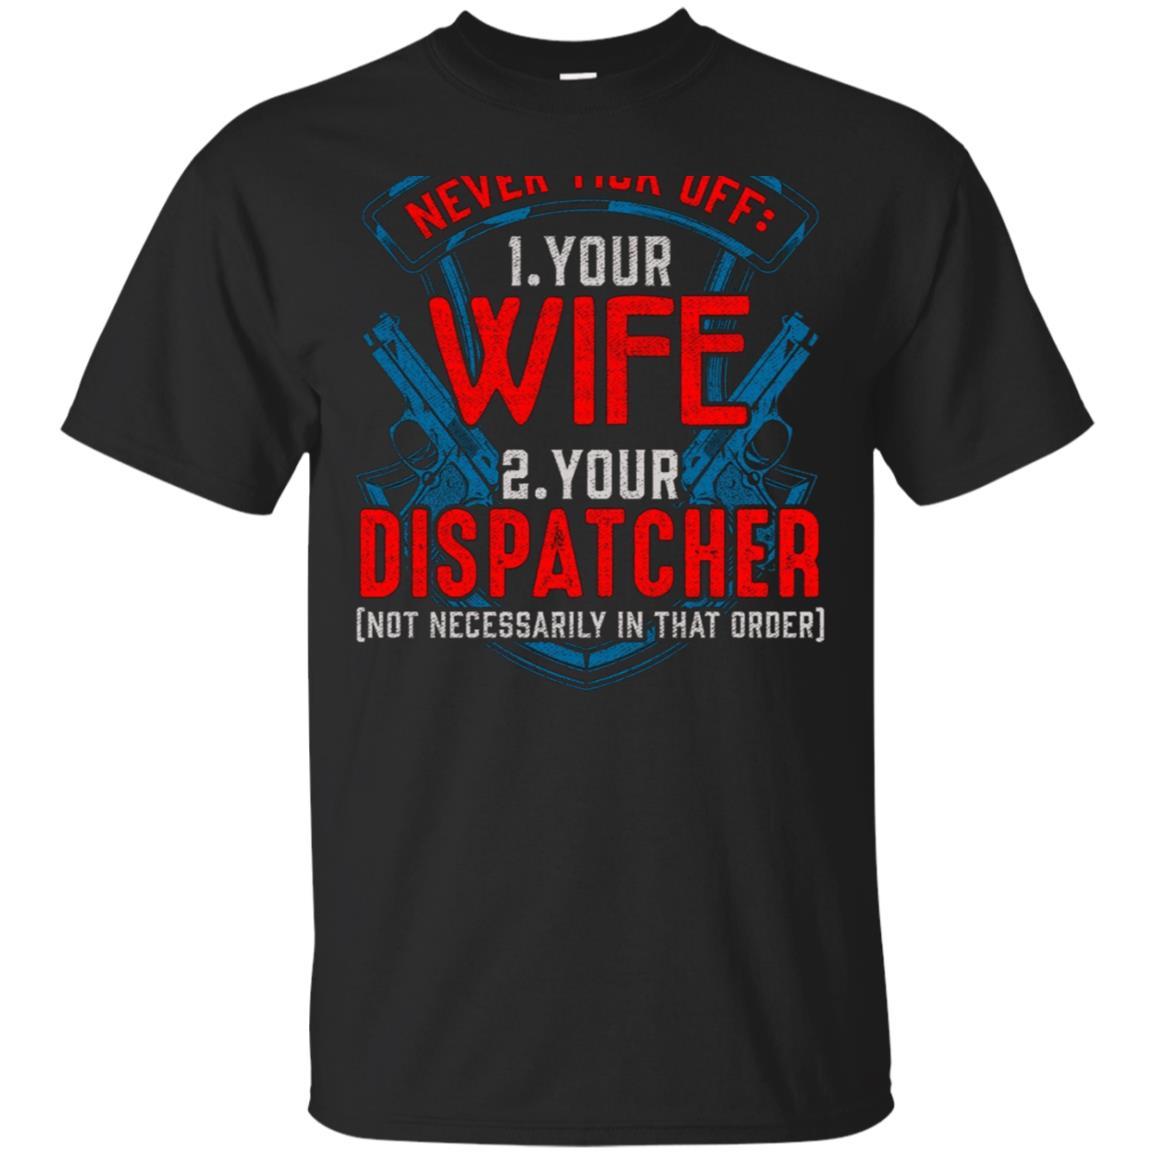 Shop From 1000 Unique Never Tick Off Your Wife Or Dispat Police Shirt Funny